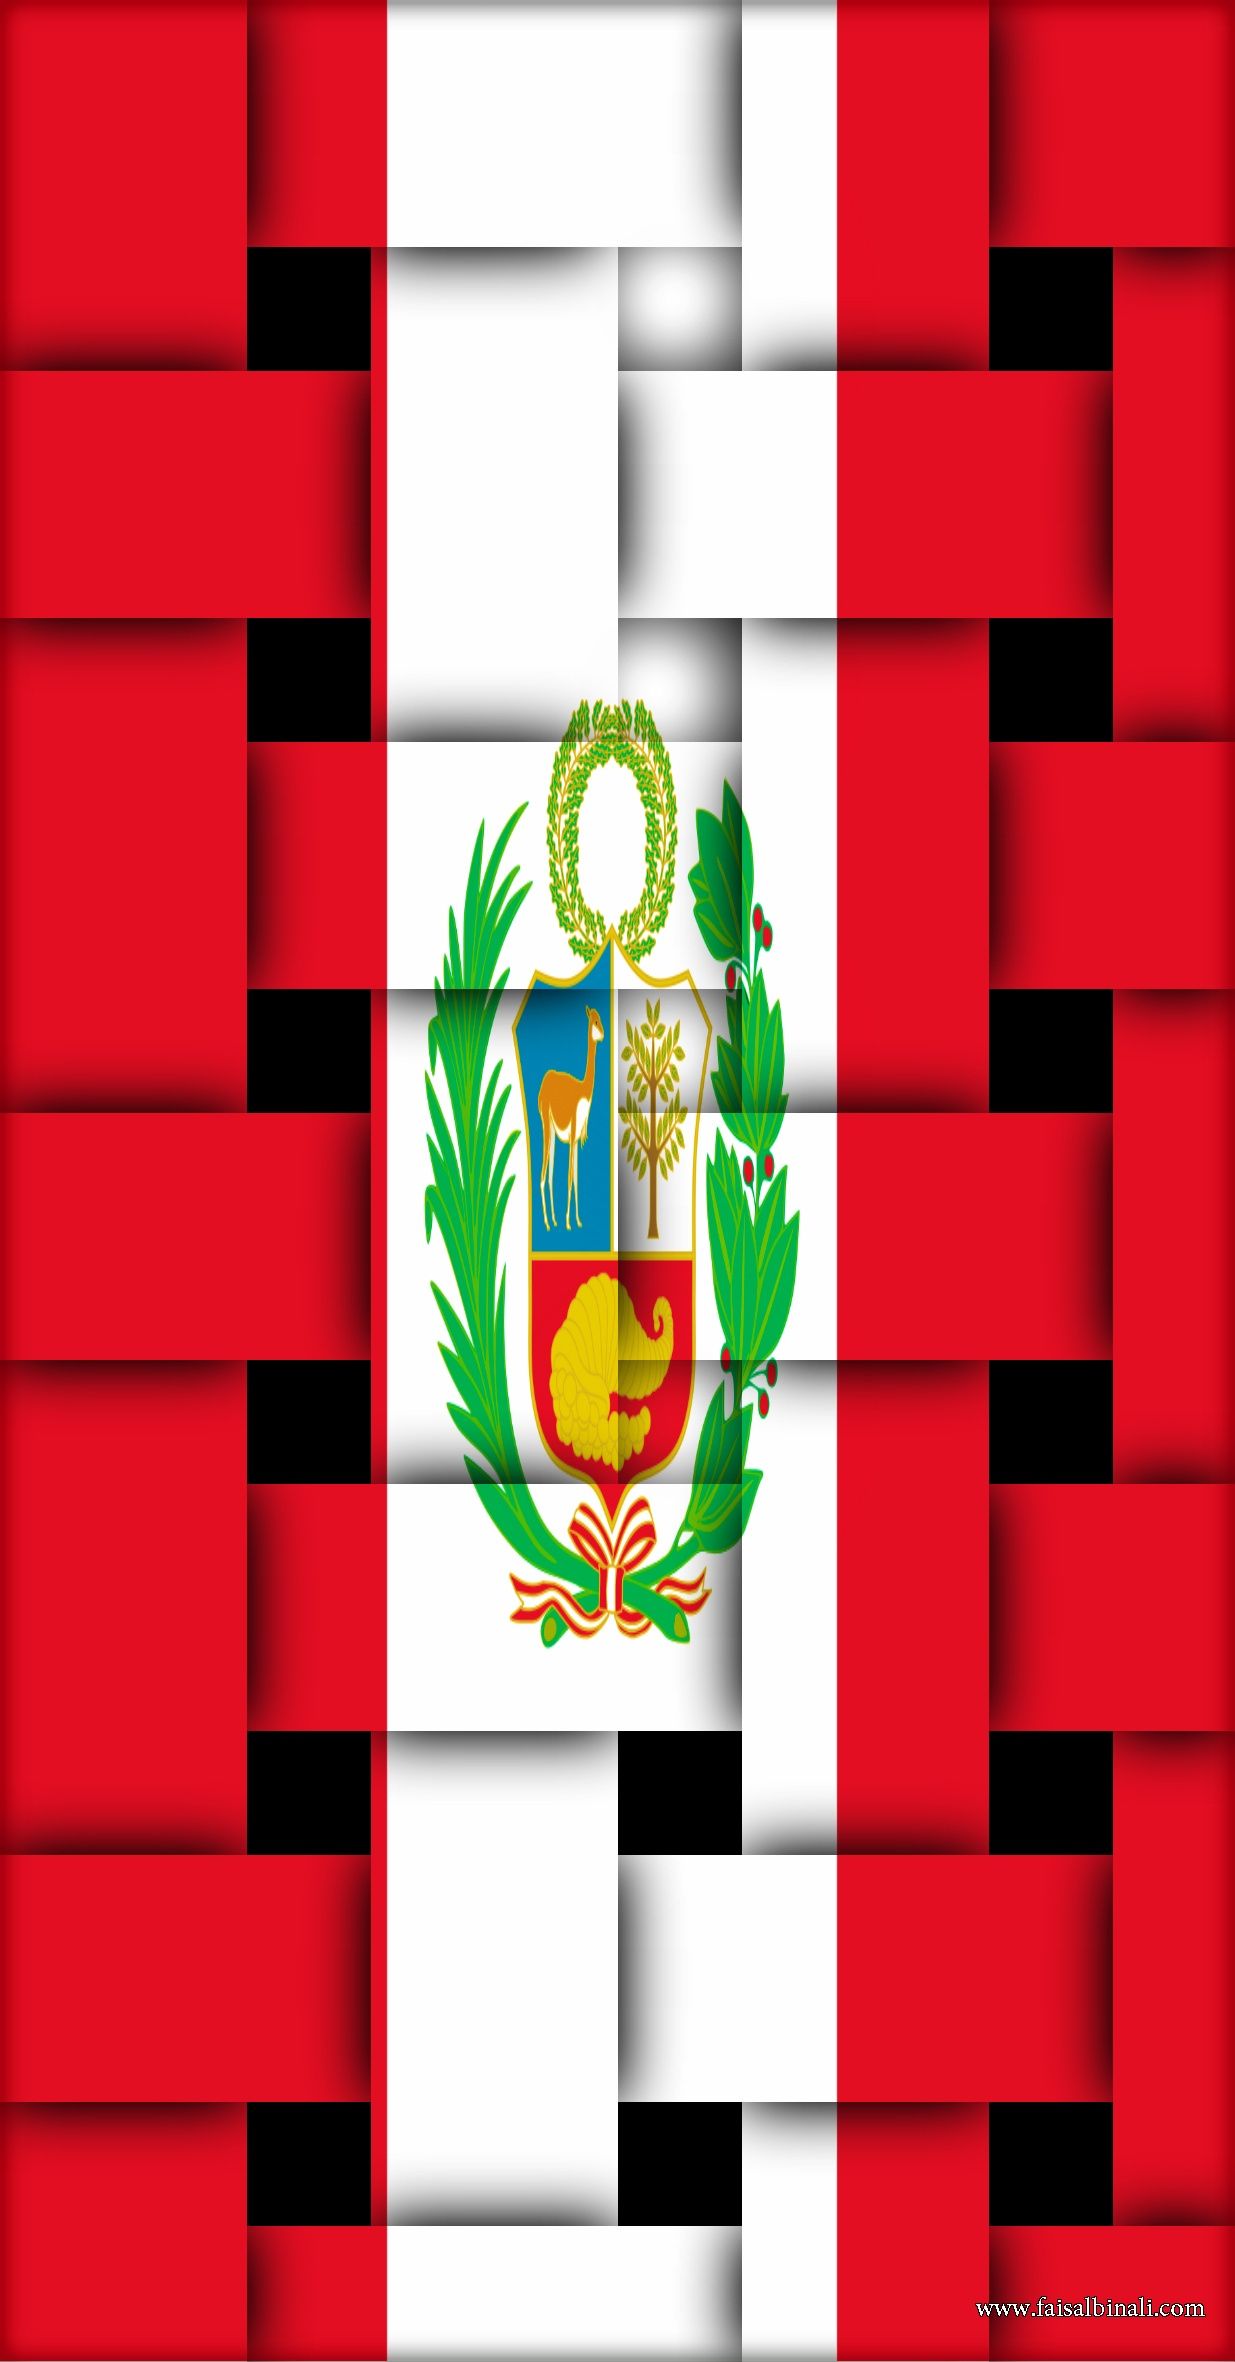 Peru Flags Artwork Wallpaper For Smartphones Tablets And